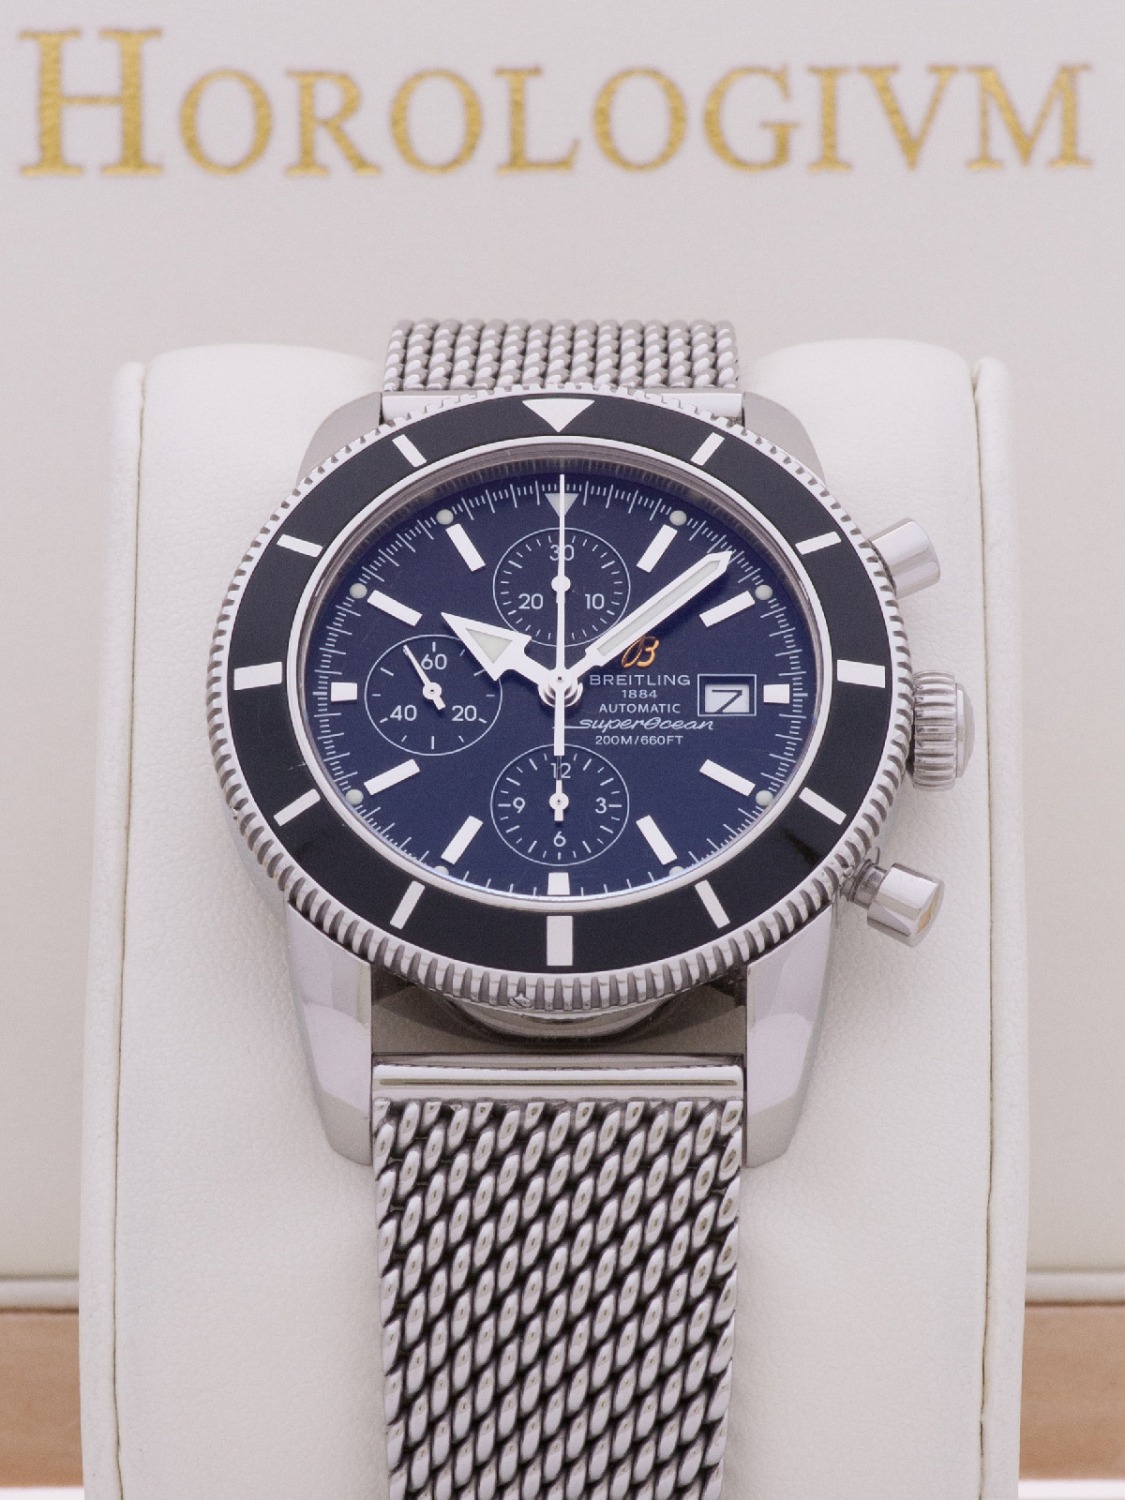 Breitling Superocean Heritage Chrono 46 MM watch, silver (case) and black (bezel)